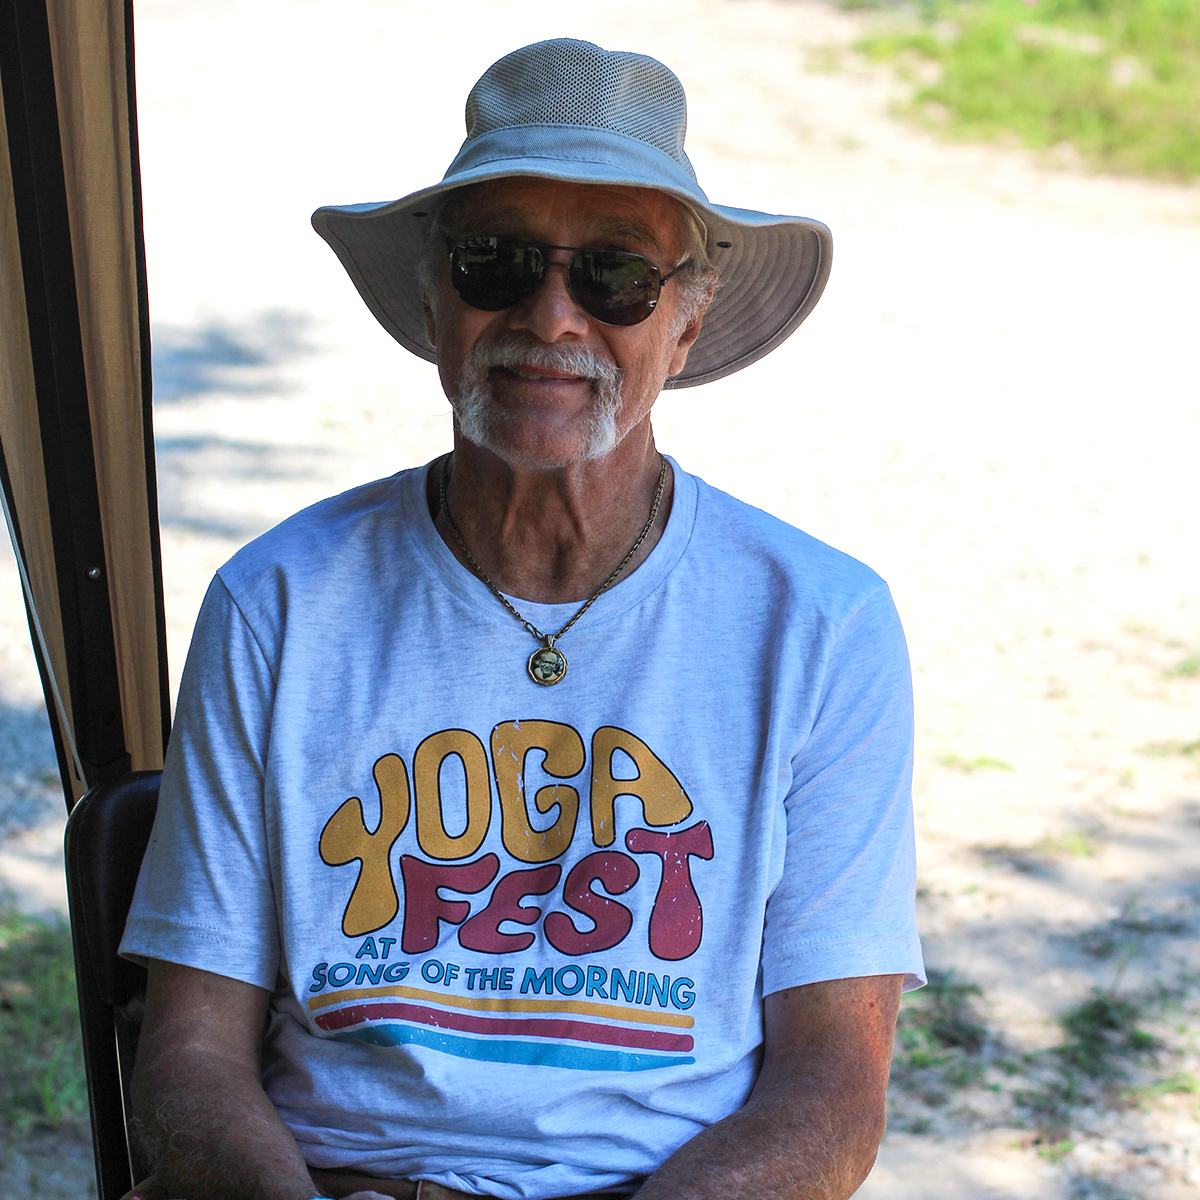 Picture of person wearing YogaFest shirt design